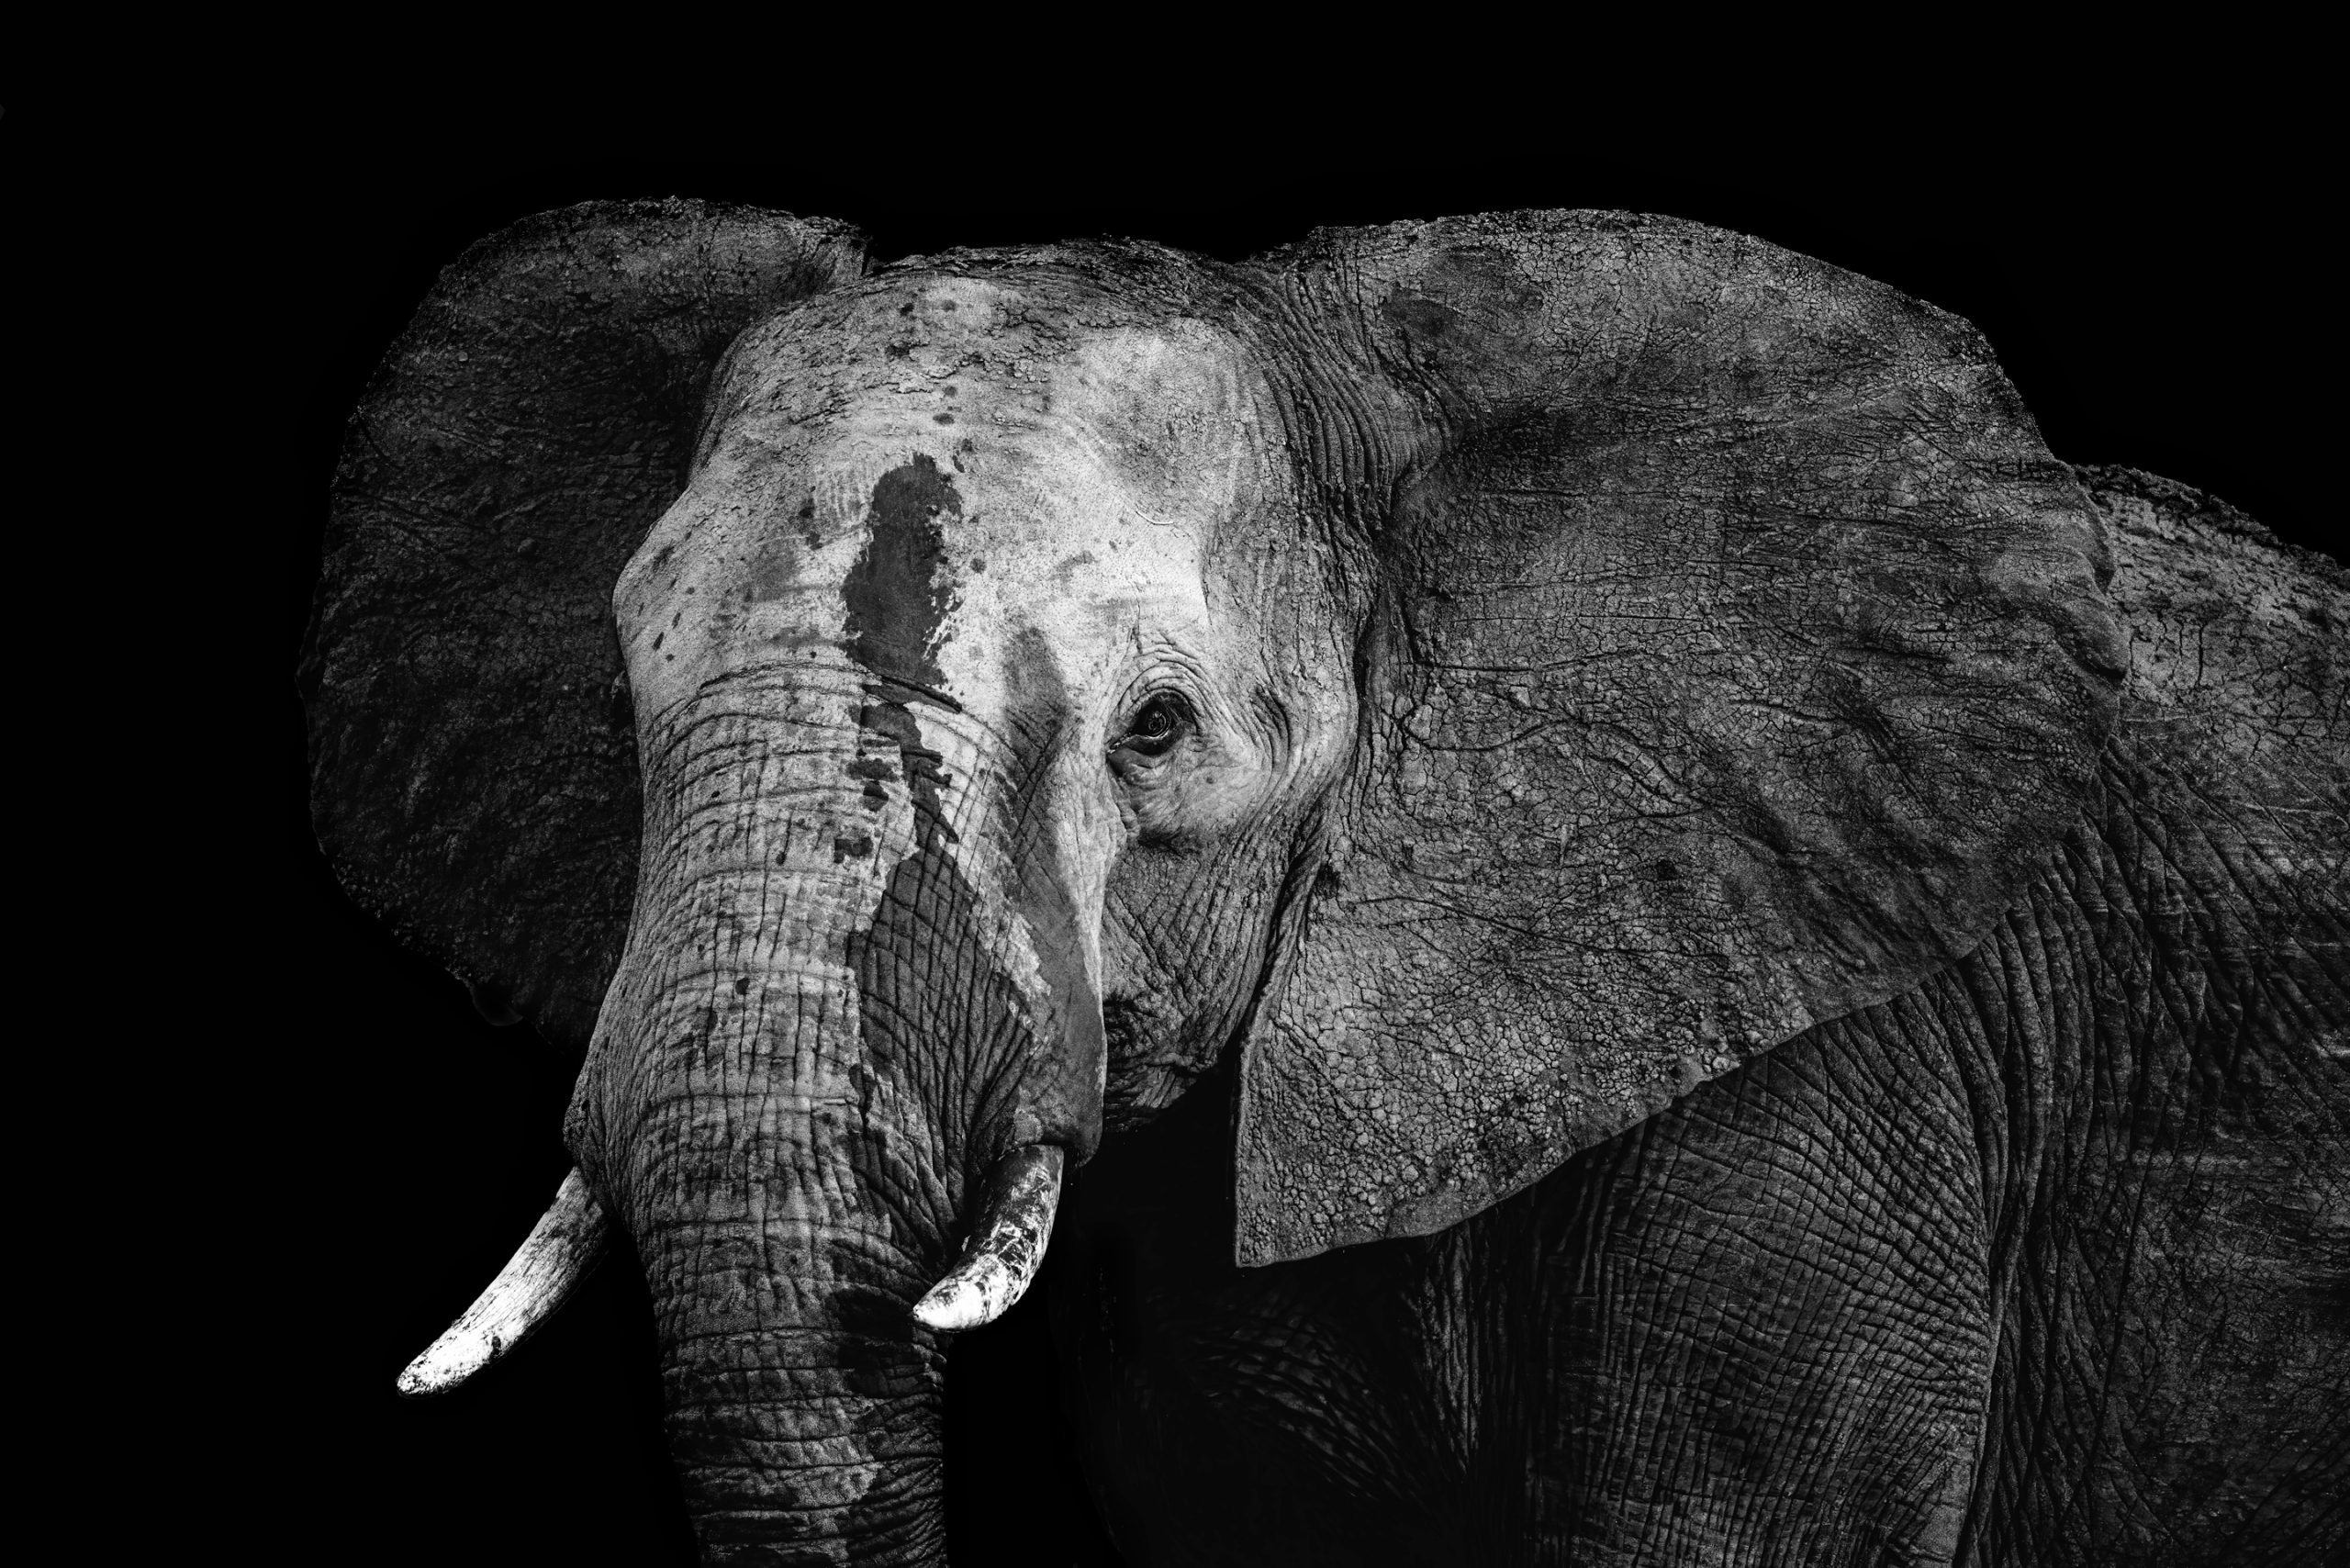 The Matriarch – A portrait of an African Savanna Elephant (Loxodonta Africana) in Kruger National Park, South Africa.